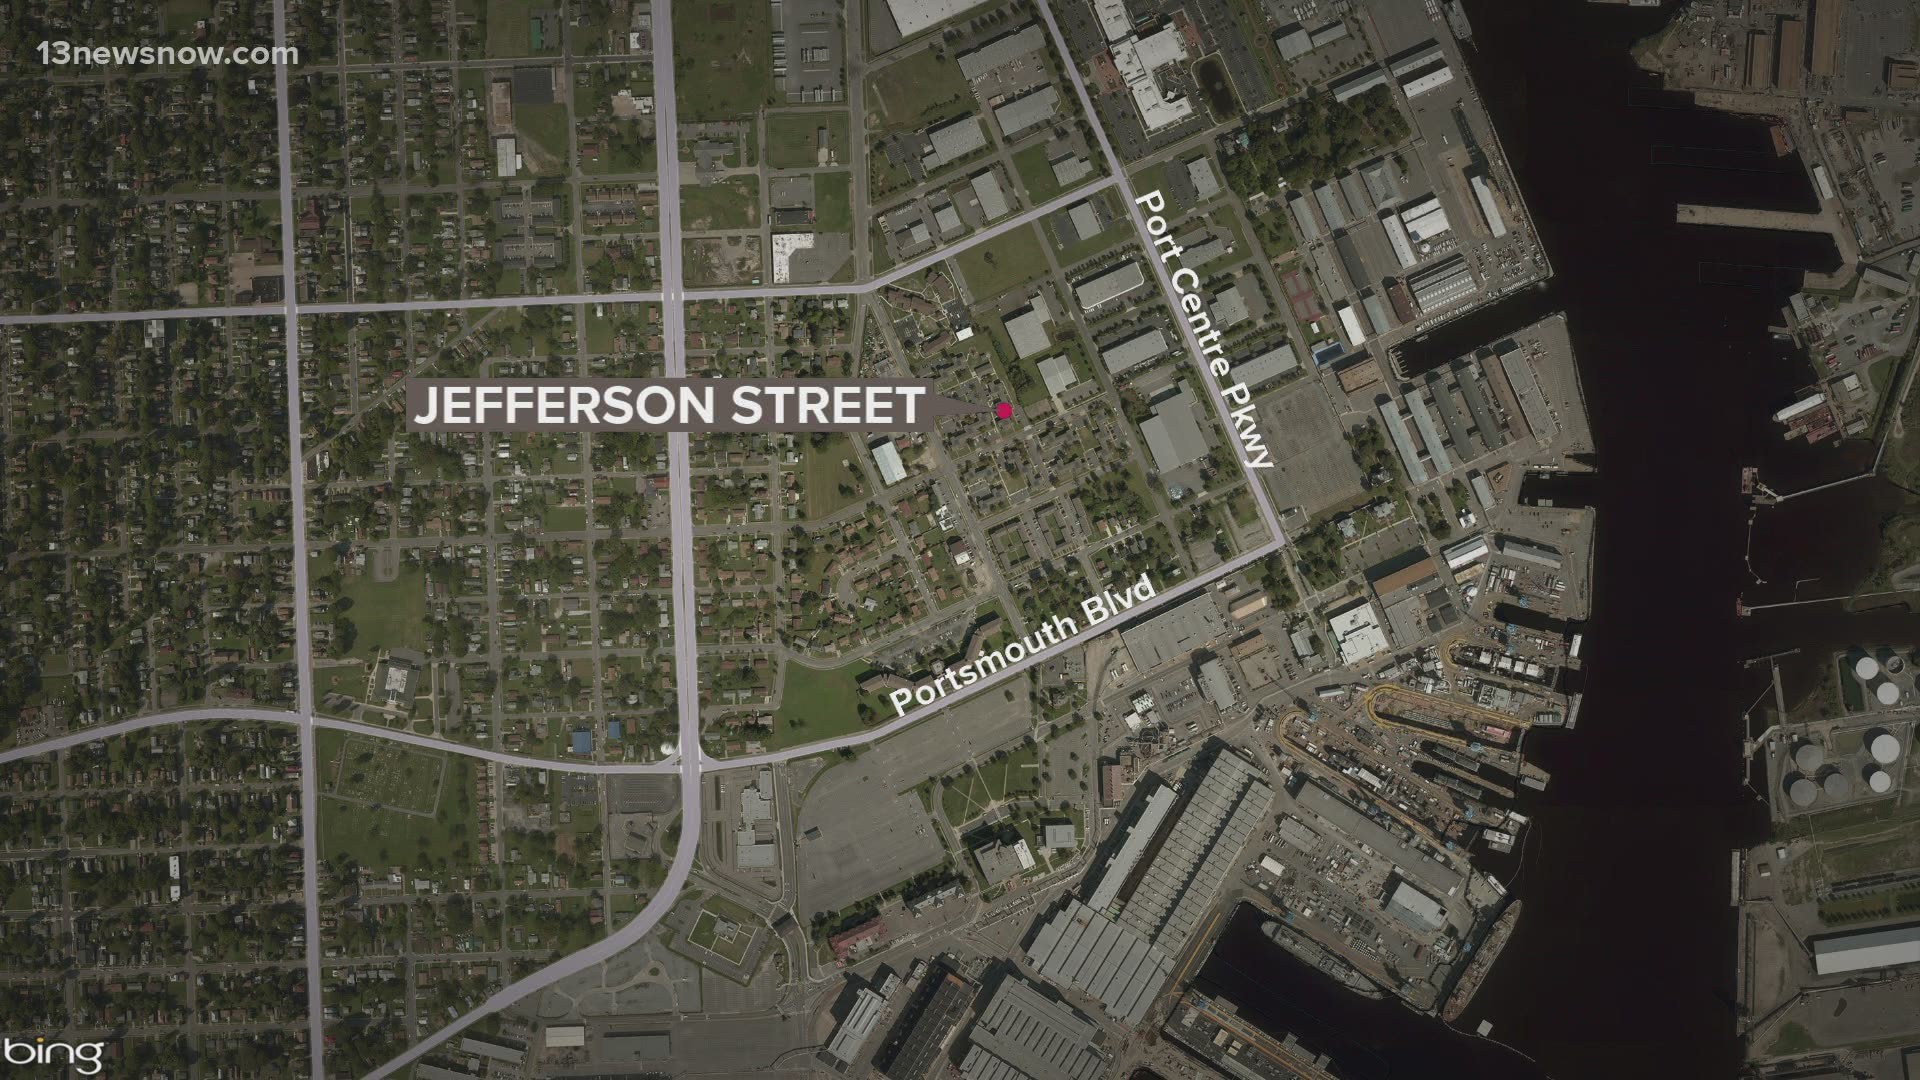 An adult man was found suffering from a gunshot wound in the 600 block of Jefferson Street Thursday night, police said.